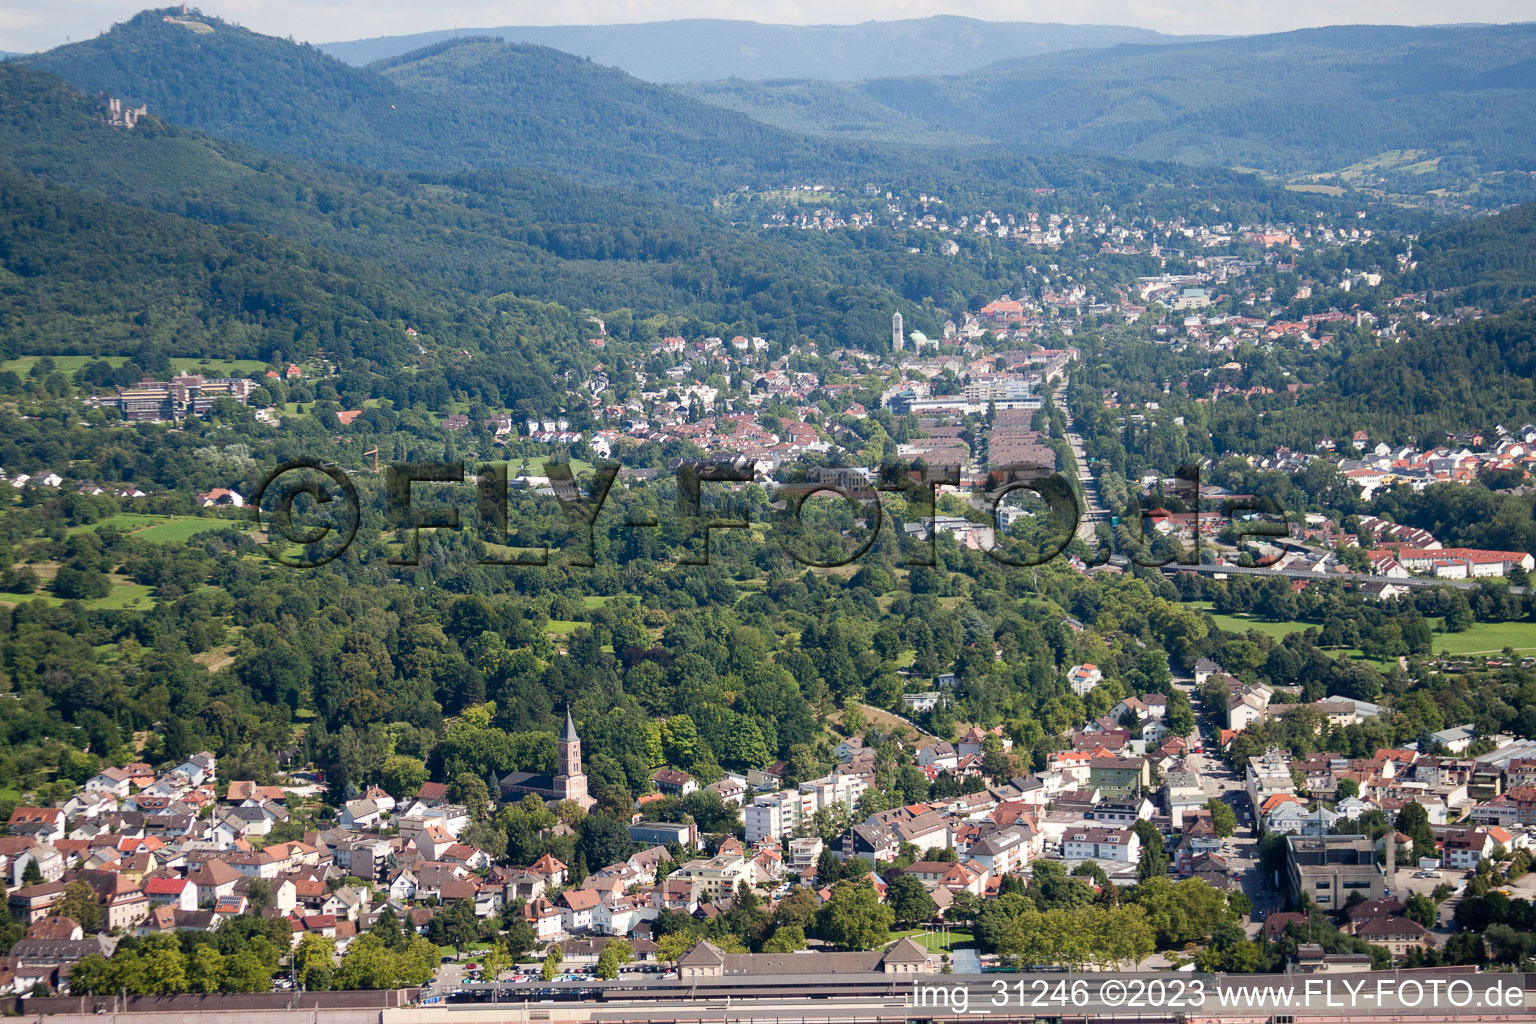 Aerial view of From the west in the district Oos in Baden-Baden in the state Baden-Wuerttemberg, Germany